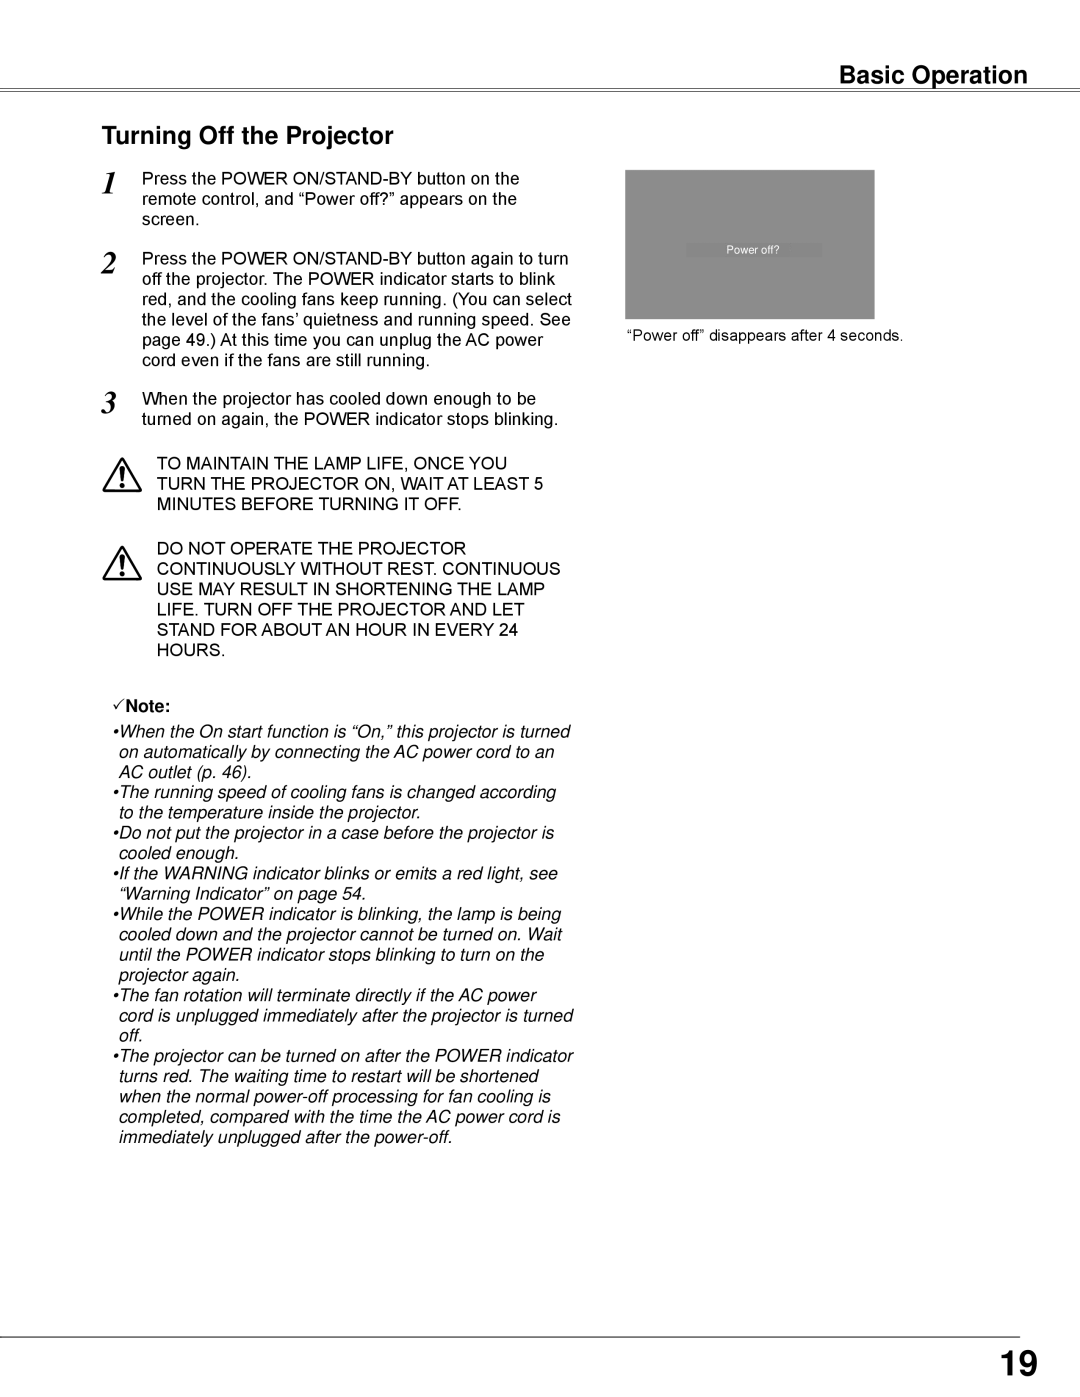 Sanyo PLC-WXE45 owner manual Basic Operation, Turning Off the Projector, Note 